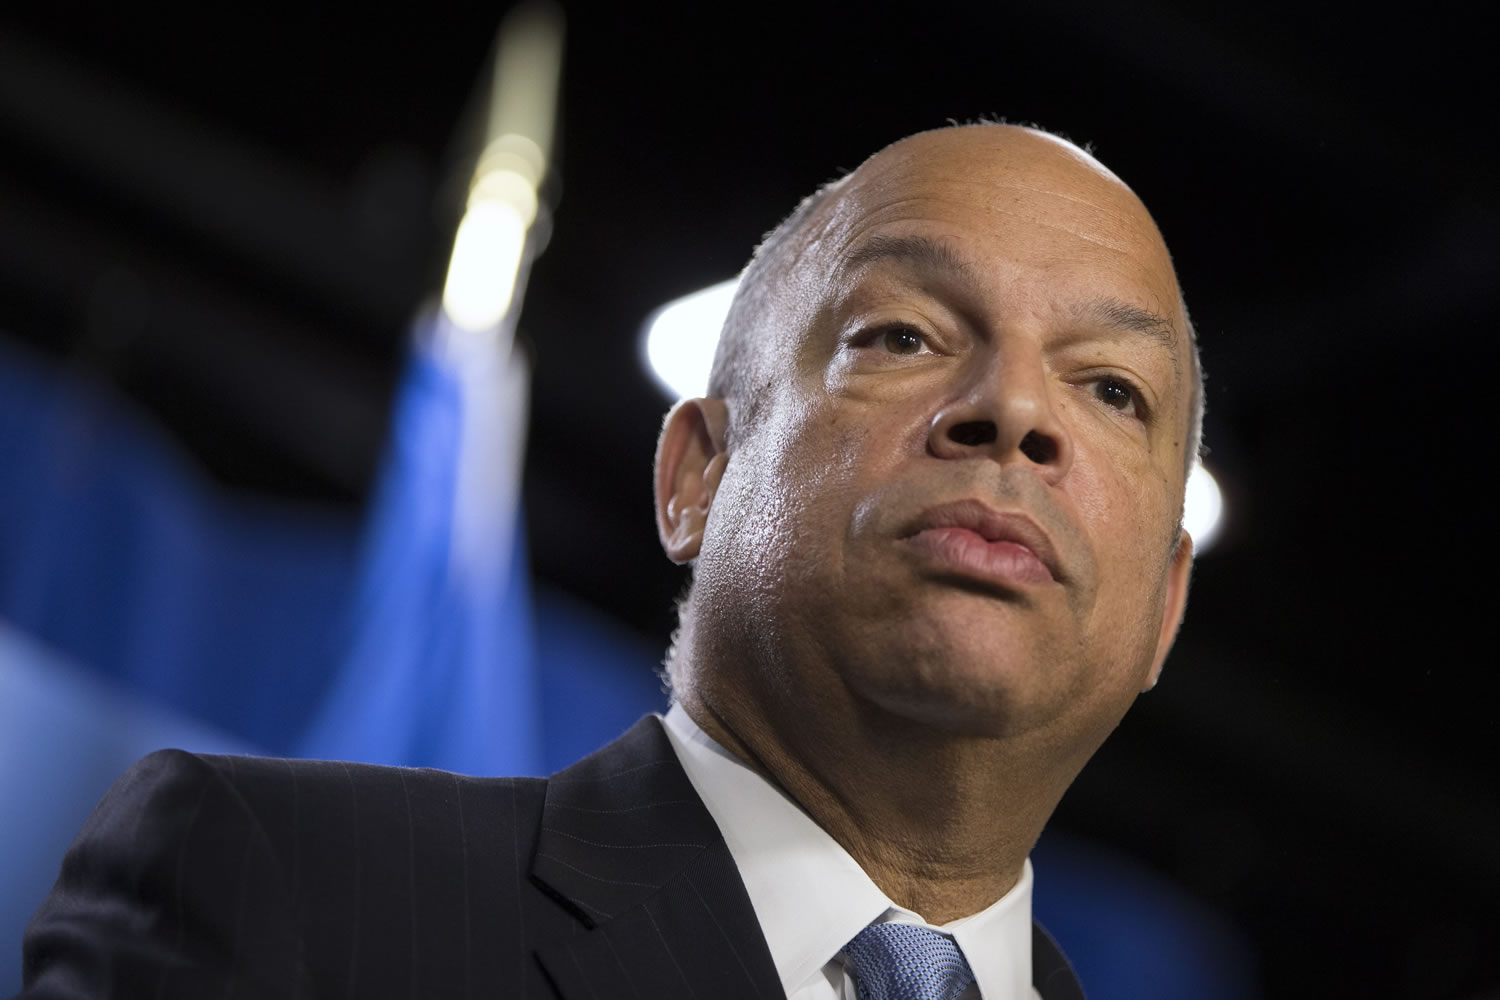 Department of Homeland Security Secretary Jeh Johnson speaks during a news conference in Washington.